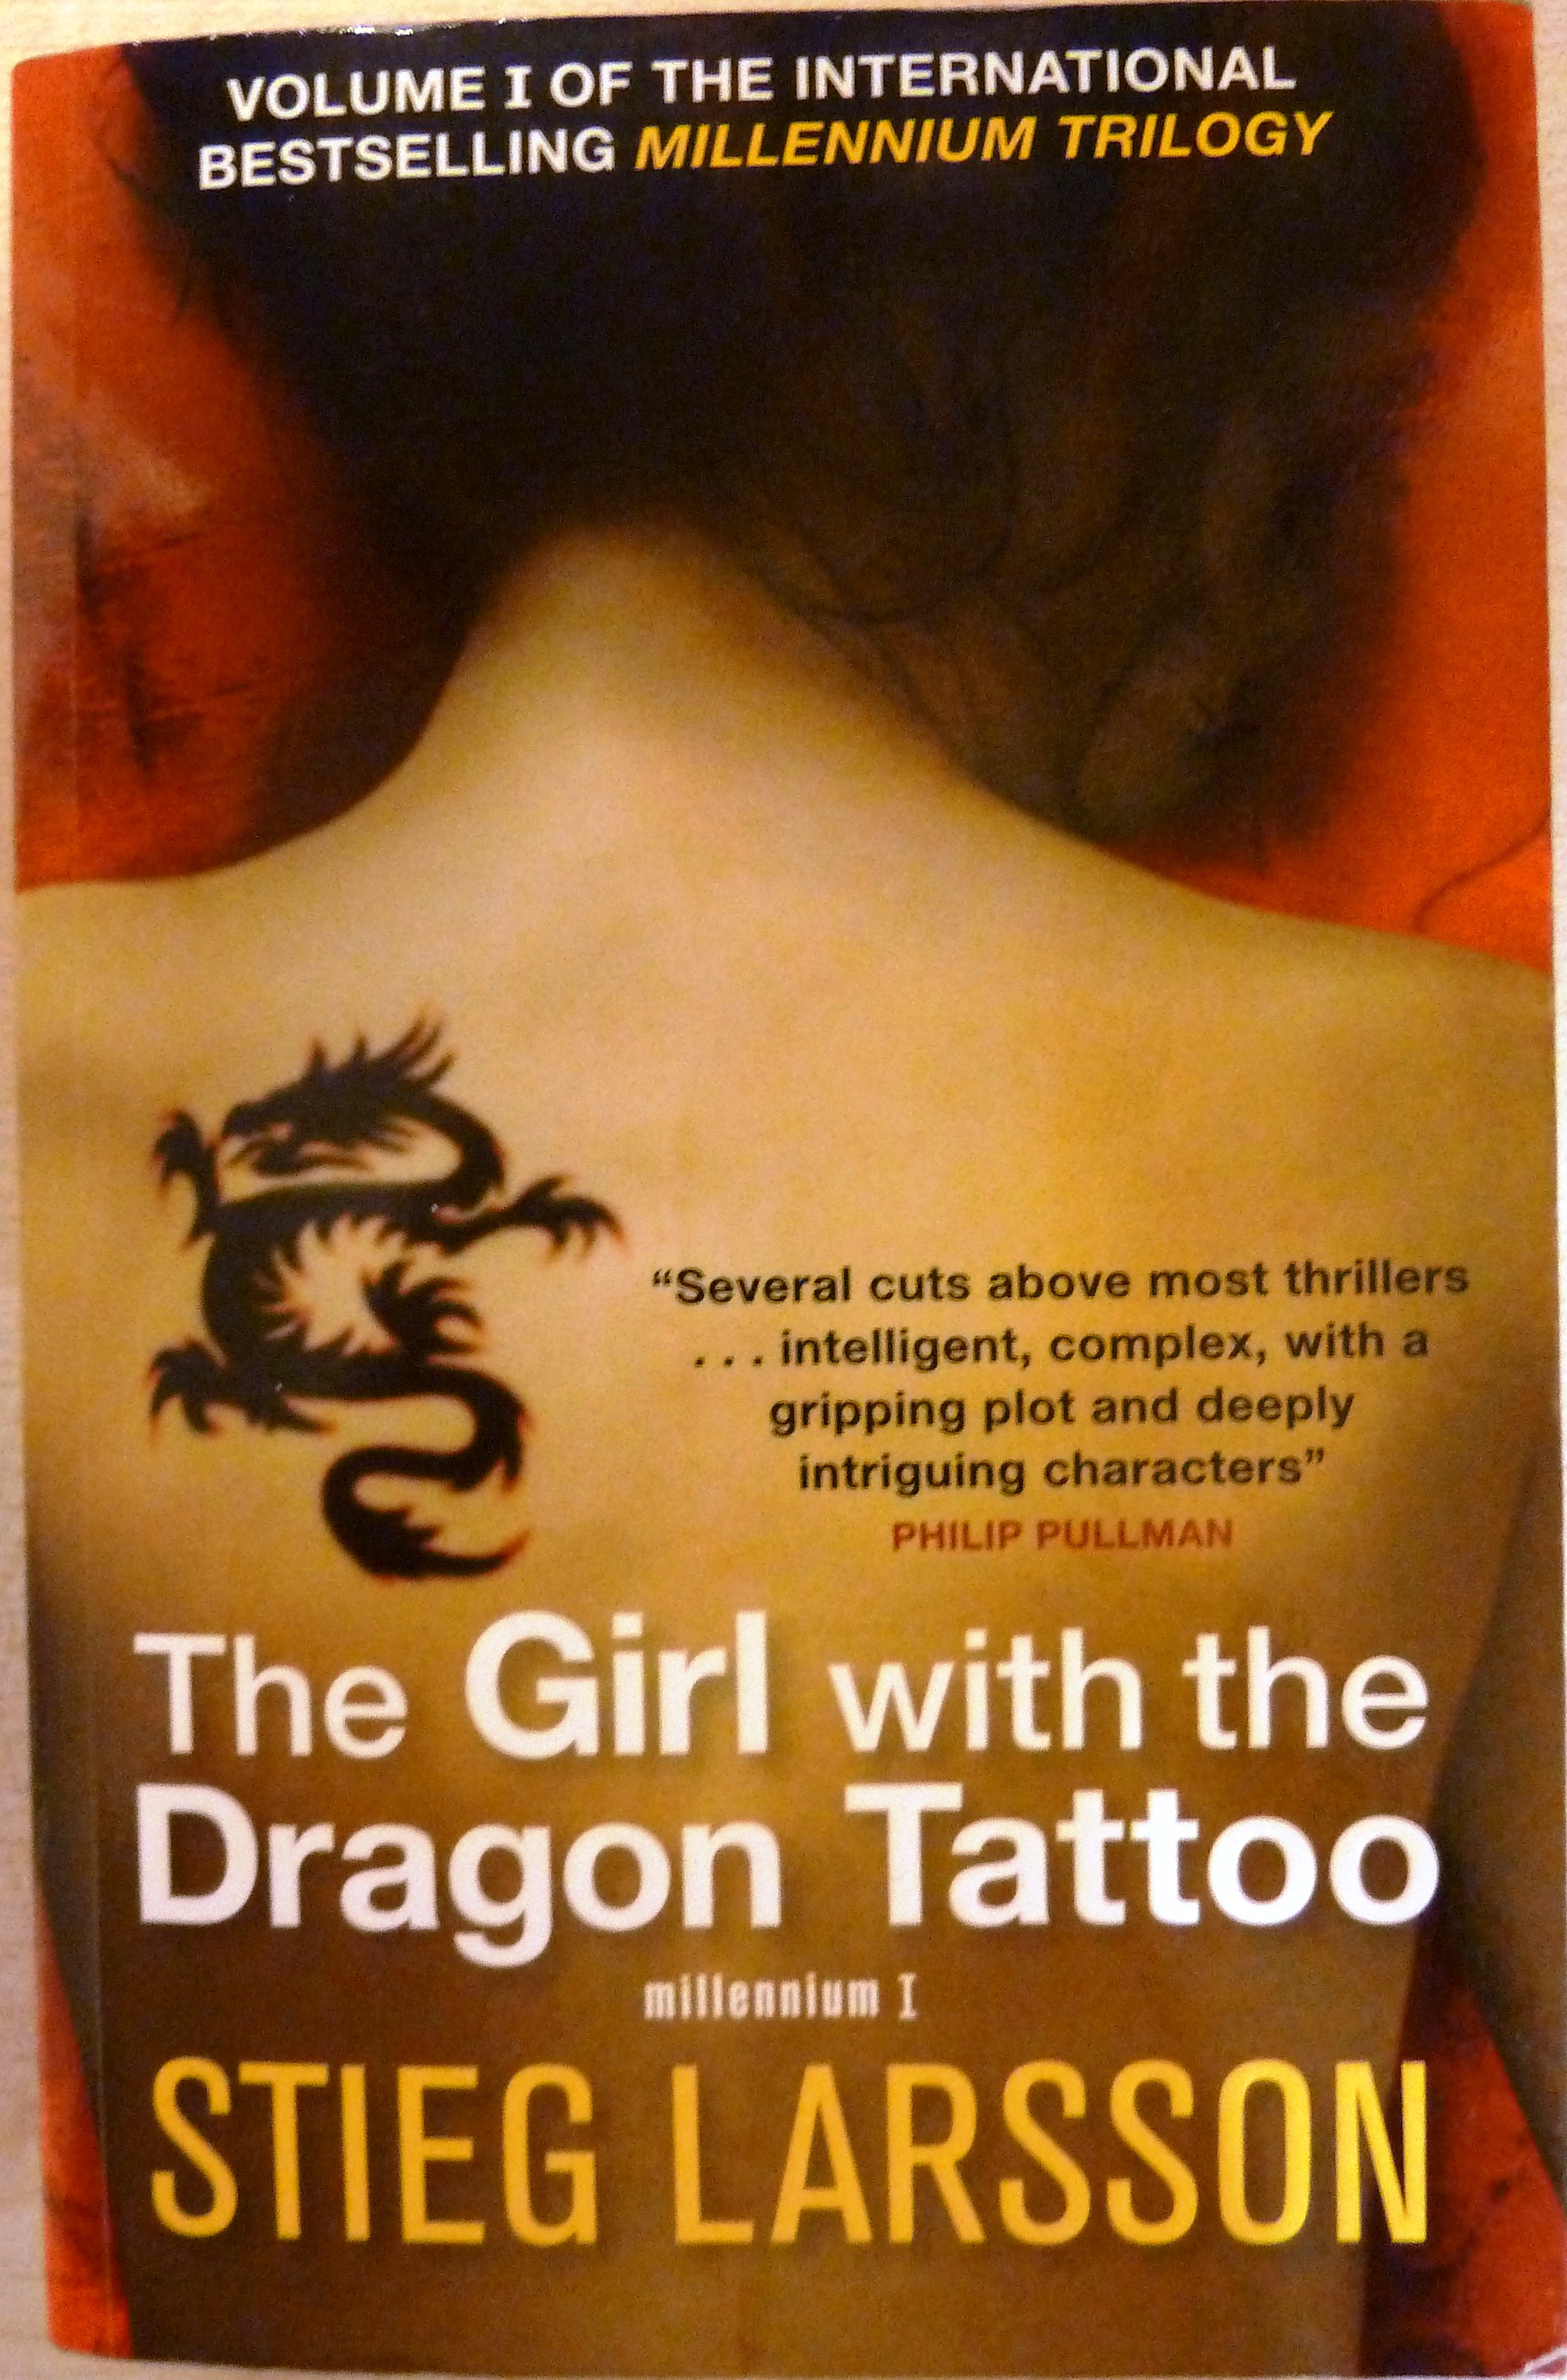 The Girl with the Dragon Tattoo – a book review | Pay it ...